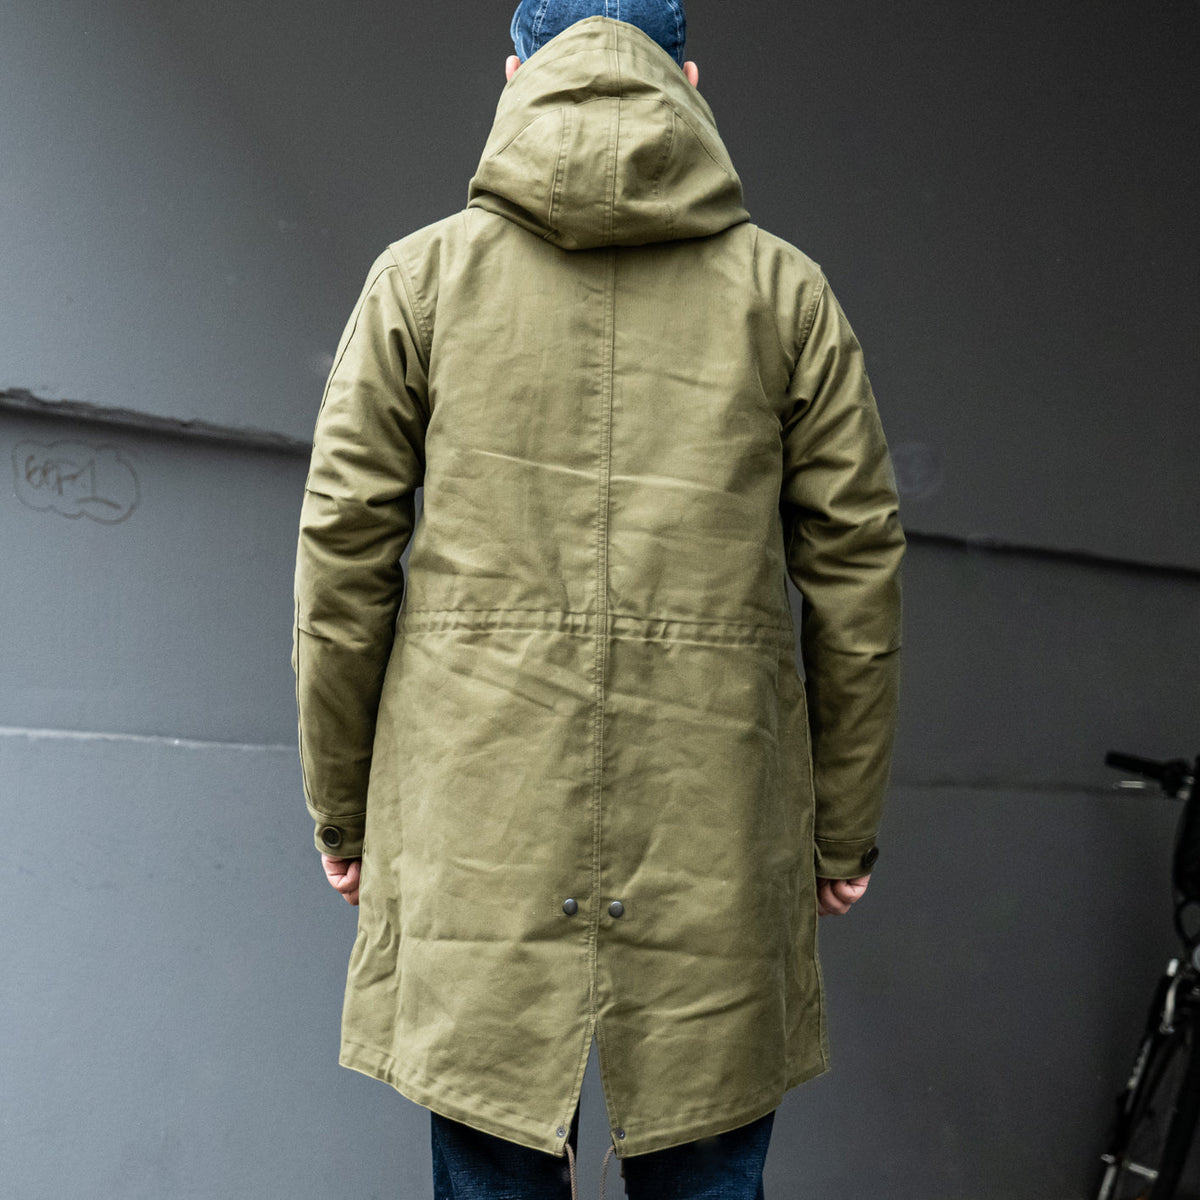 – Heart Iron Olive Field Drab Coat Whipcord M-51 IHM-34